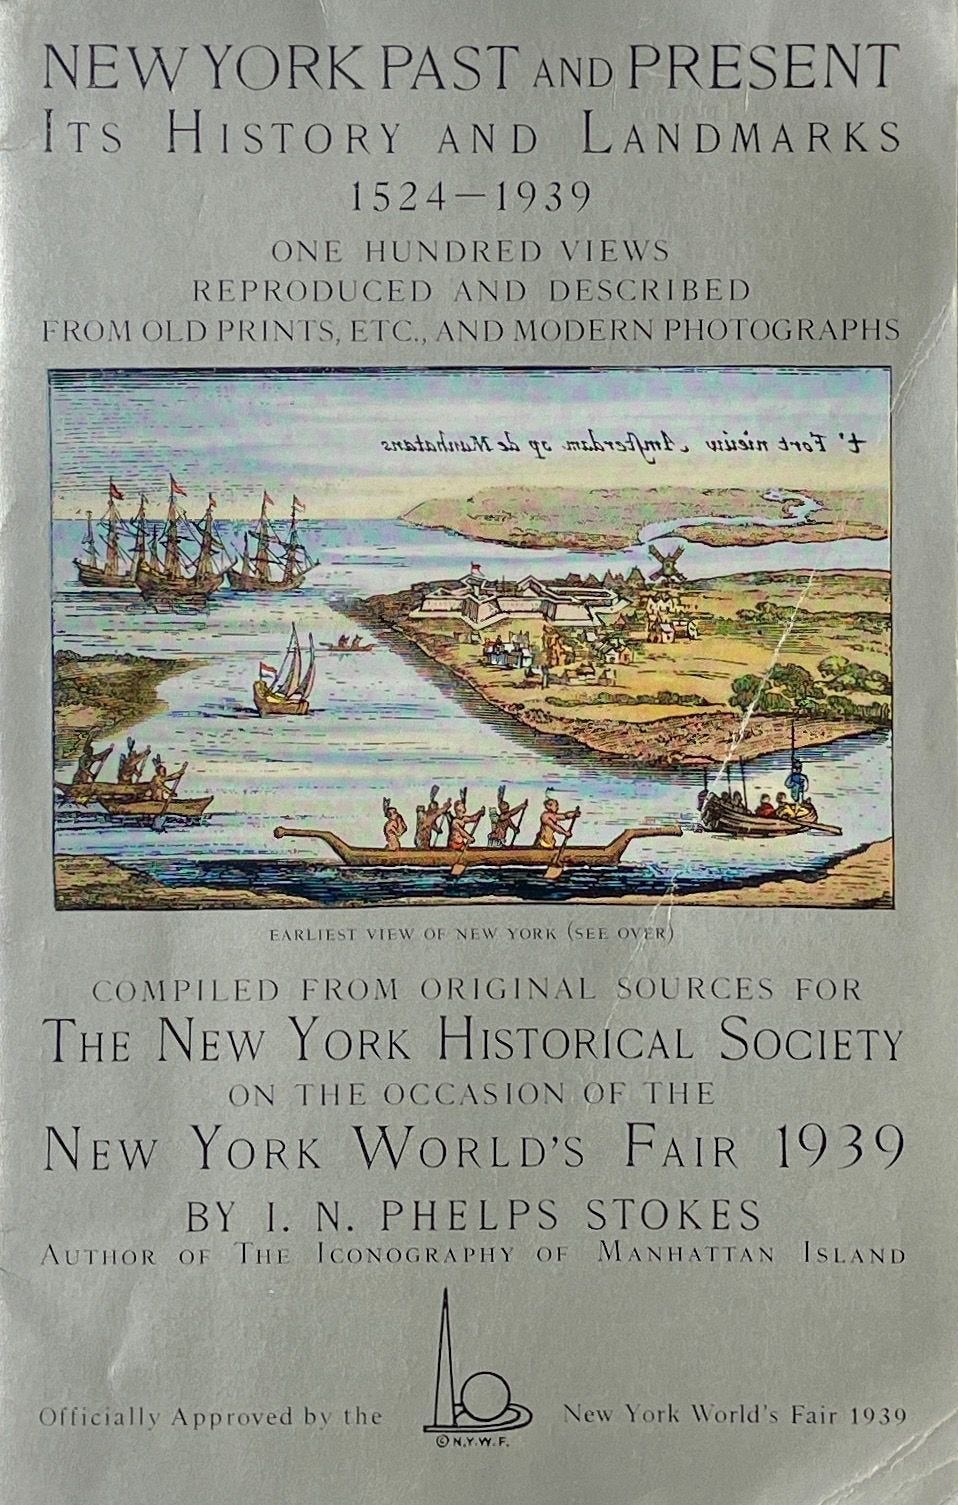 New York Past and Present: Its History and Landmarks 1524-1939 by I. N  PHELPS STOKES - First Edition - from Trevian Books (SKU: 014004)